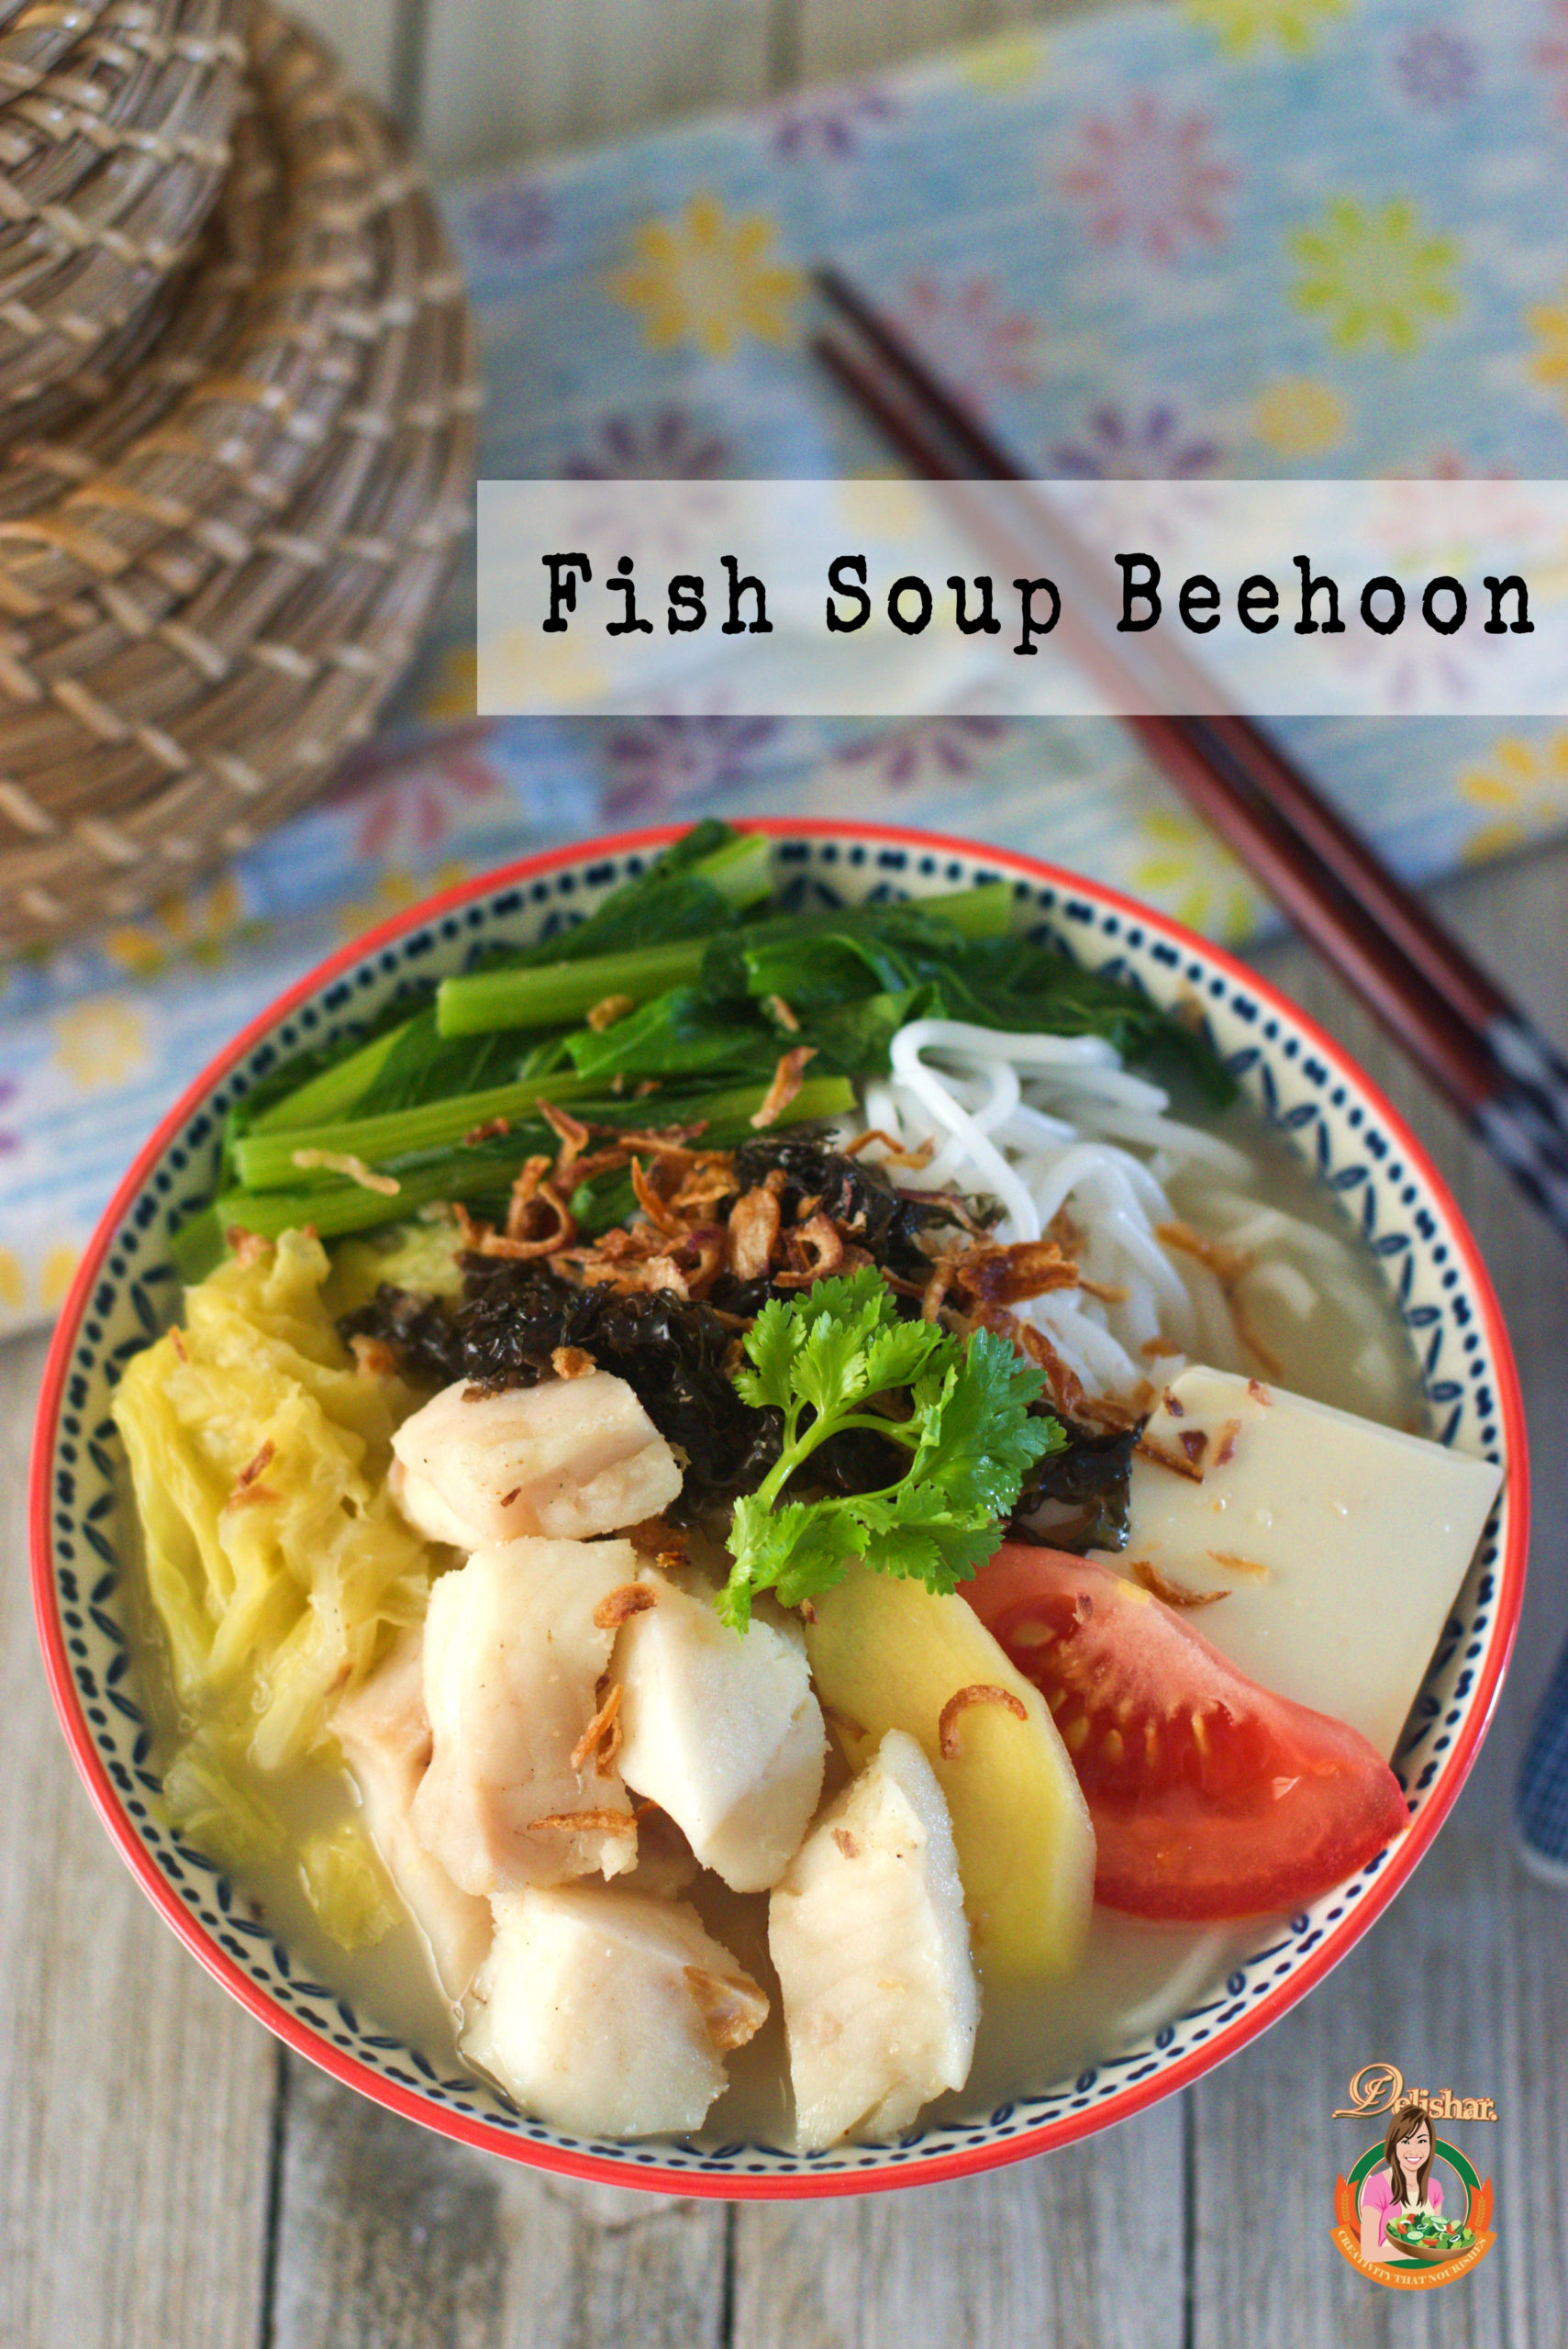 Fish Soup Beehoon - Delishar | Singapore Cooking, Recipe, and Lifestyle ...